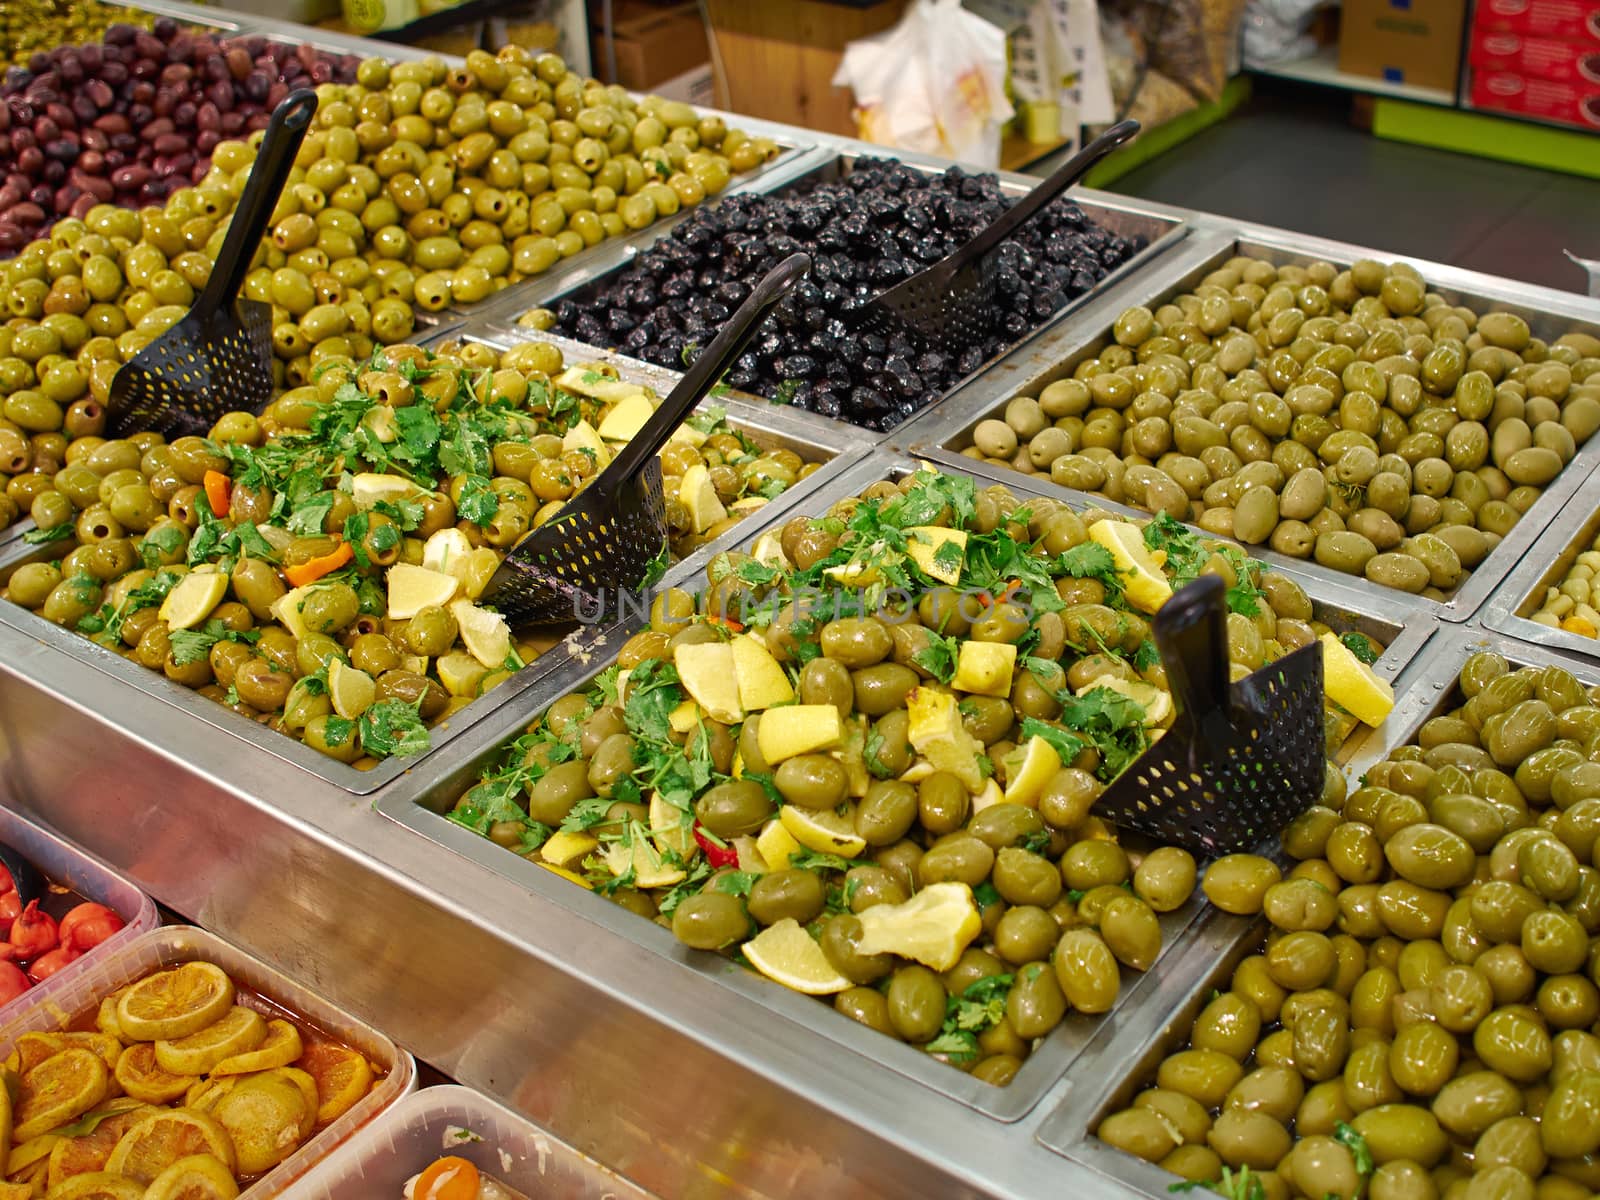 Selection of olives for sale by Ronyzmbow